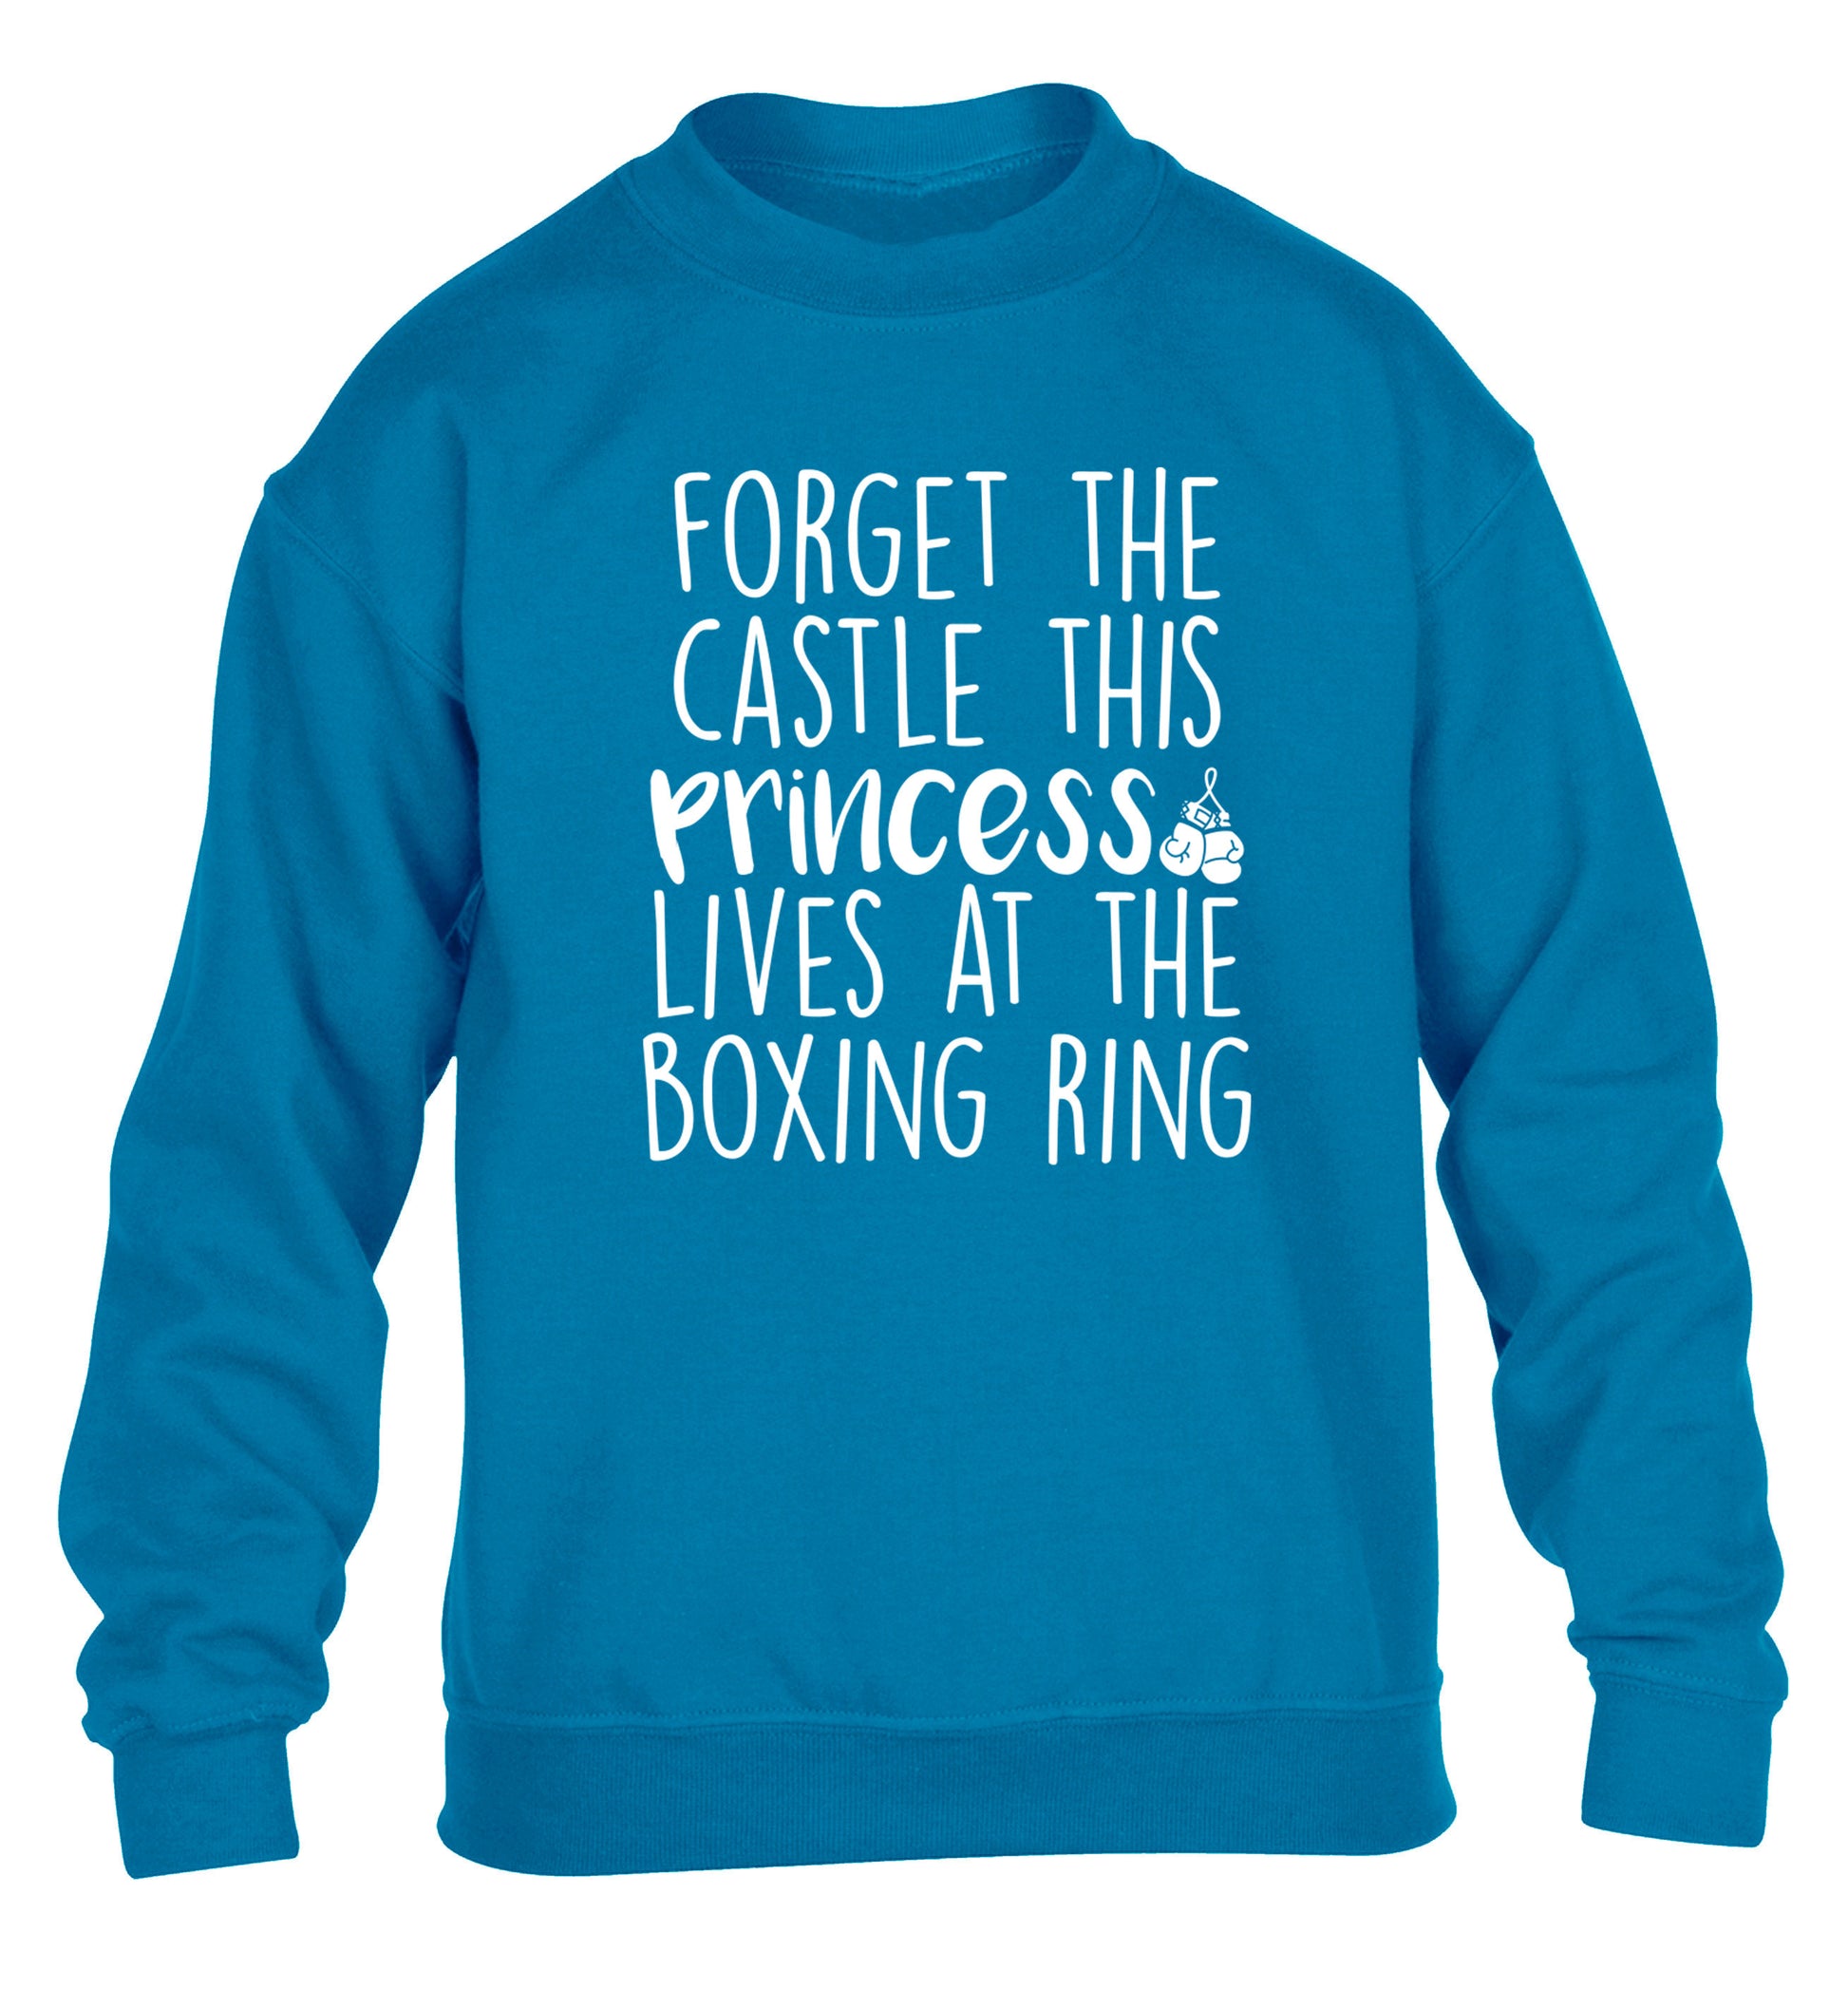 Forget the castle this princess lives at the boxing ring children's blue sweater 12-14 Years